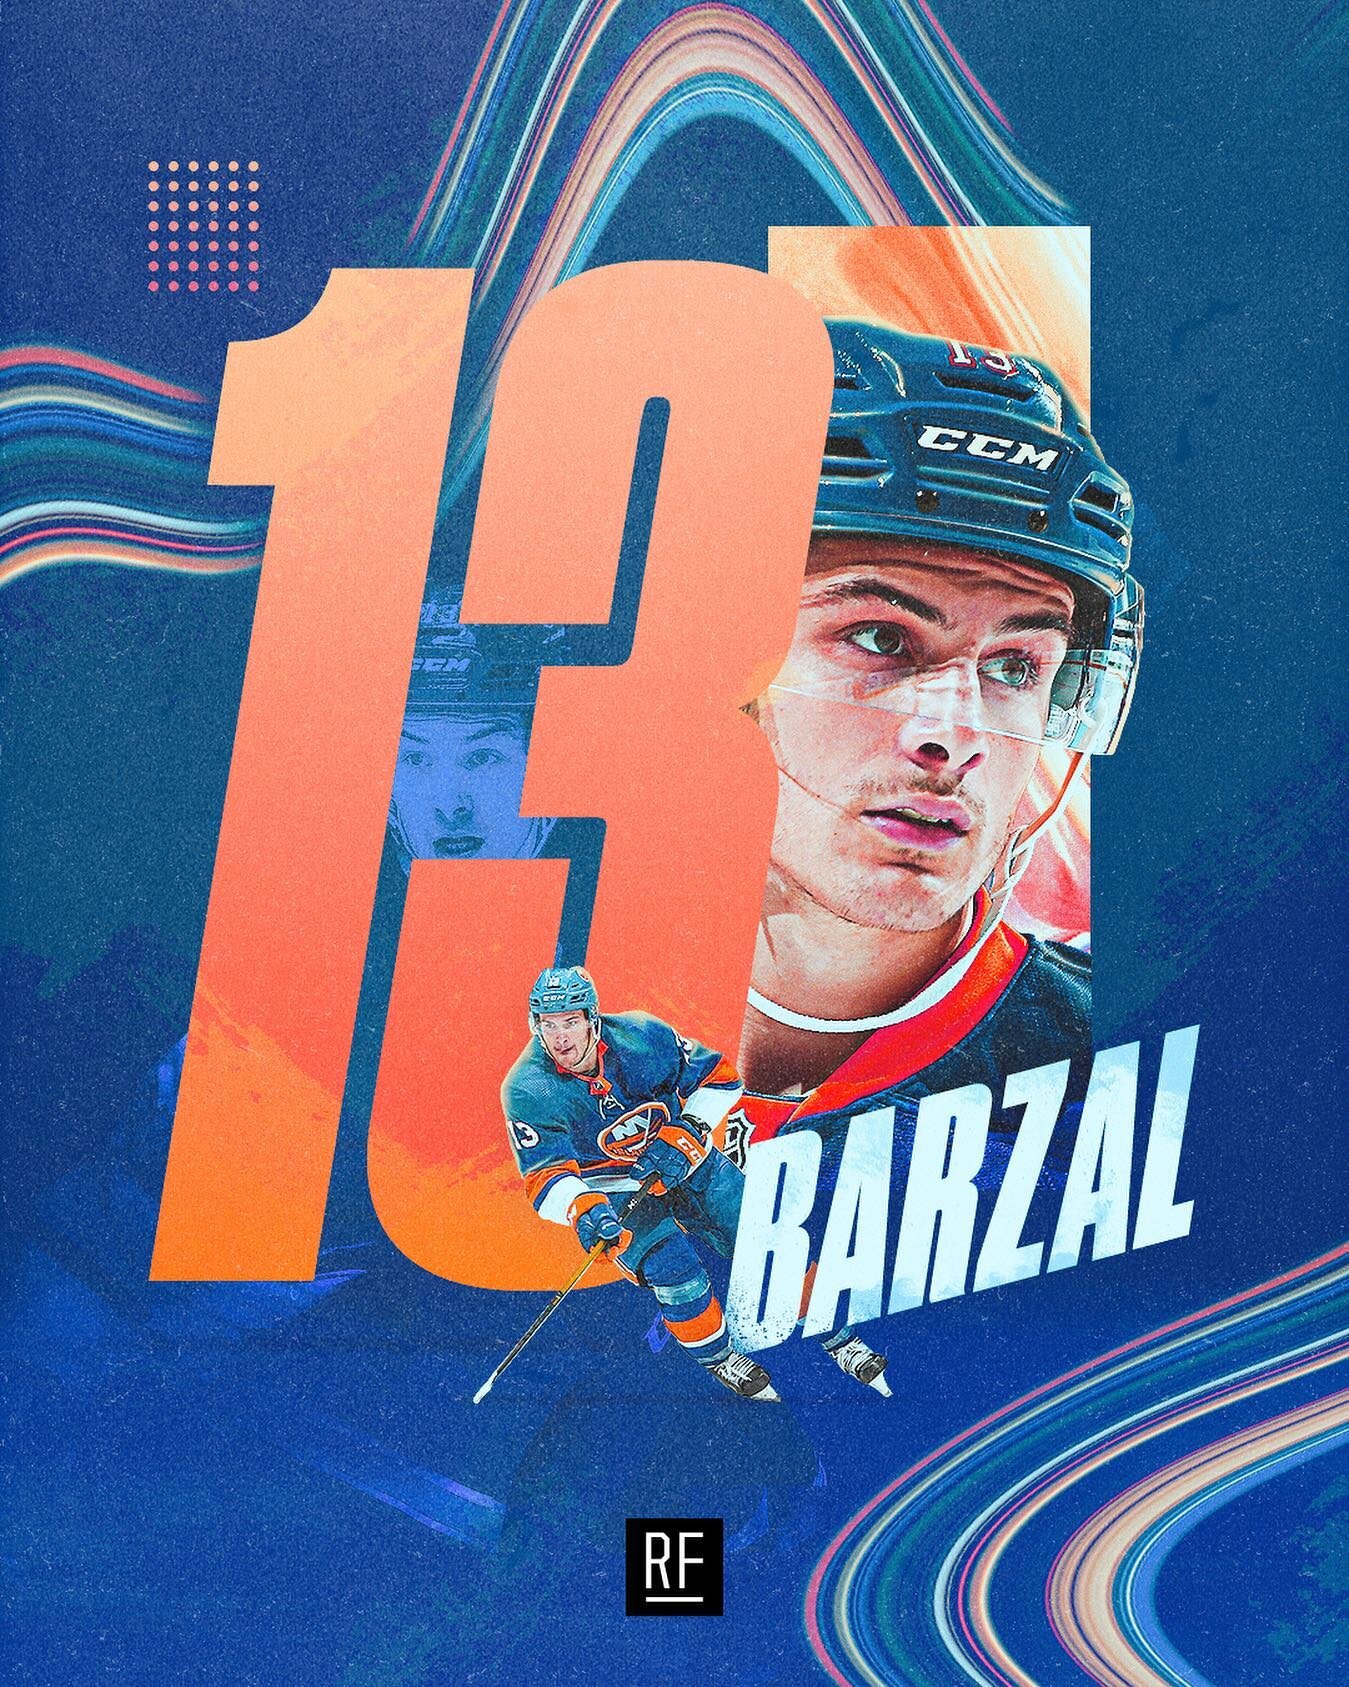 Haven&rsquo;t posted anything in a while. NHL playoffs are going on and Matt Barzal is pretty good so I decided to make something and post it on IG for once. #islanders #nyislanders #newyorksaints #barzal #mattbarzal #isles #stanleycup #nhl @ny_islan